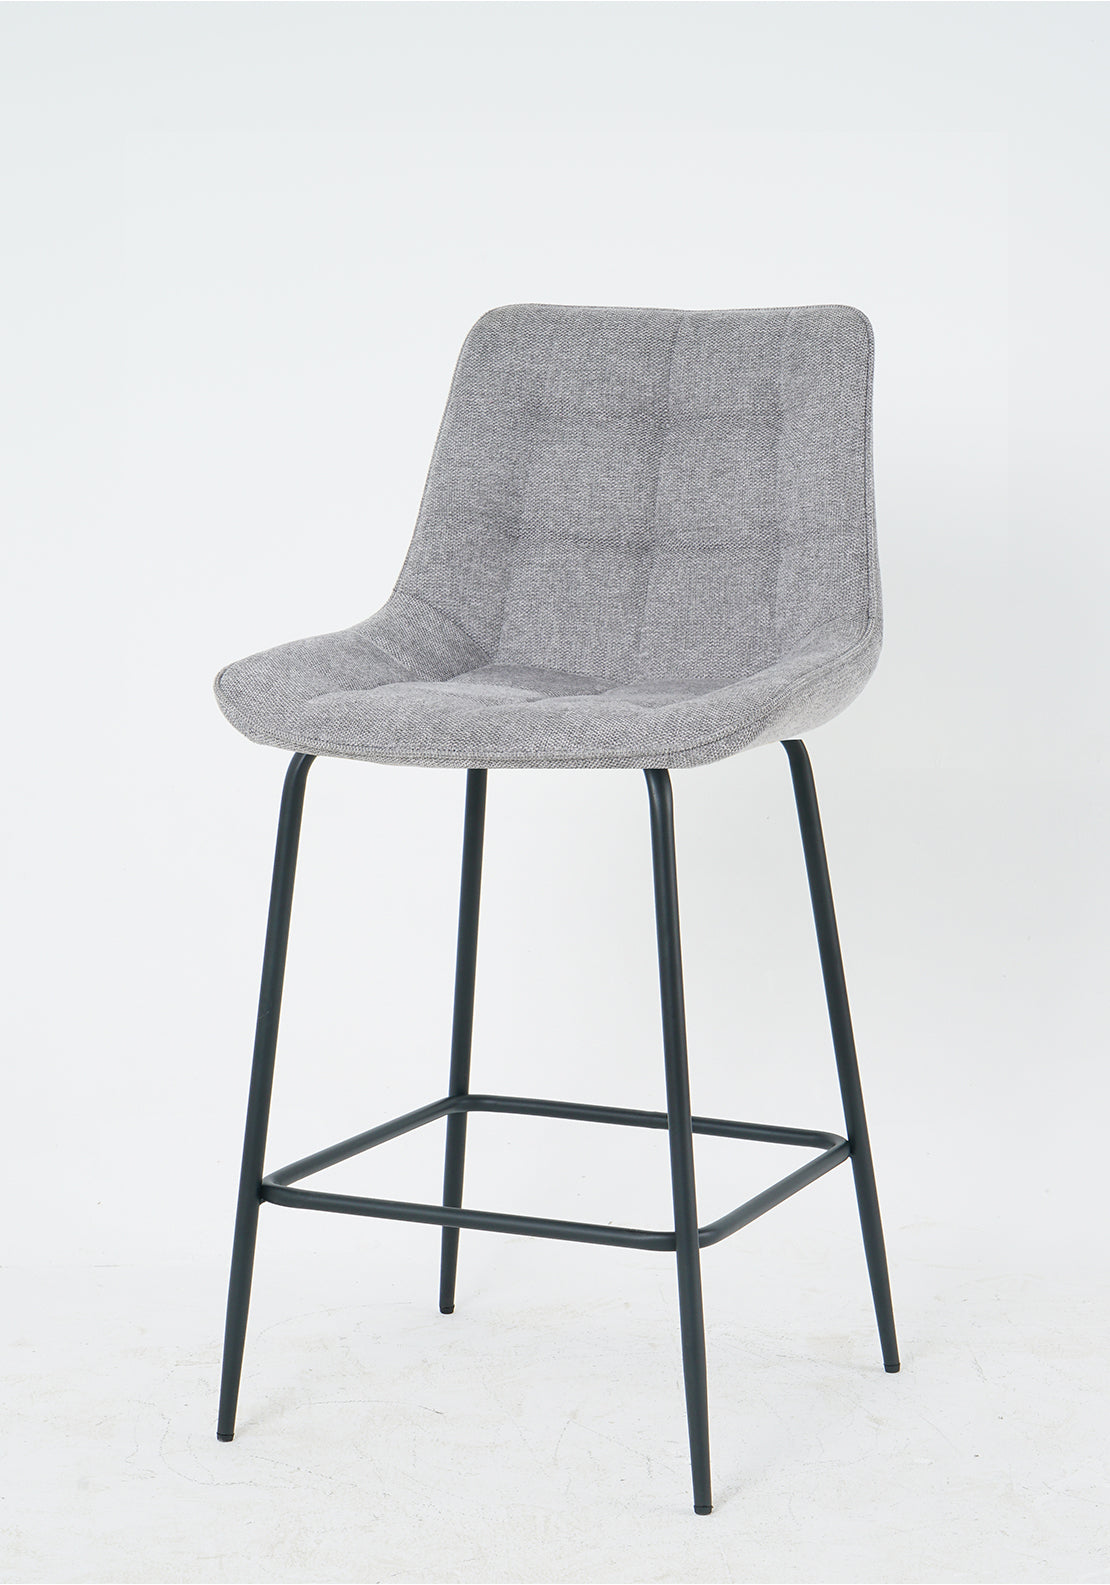 The Home Collection Barstool With Black Legs - Grey / Black 1 Shaws Department Stores